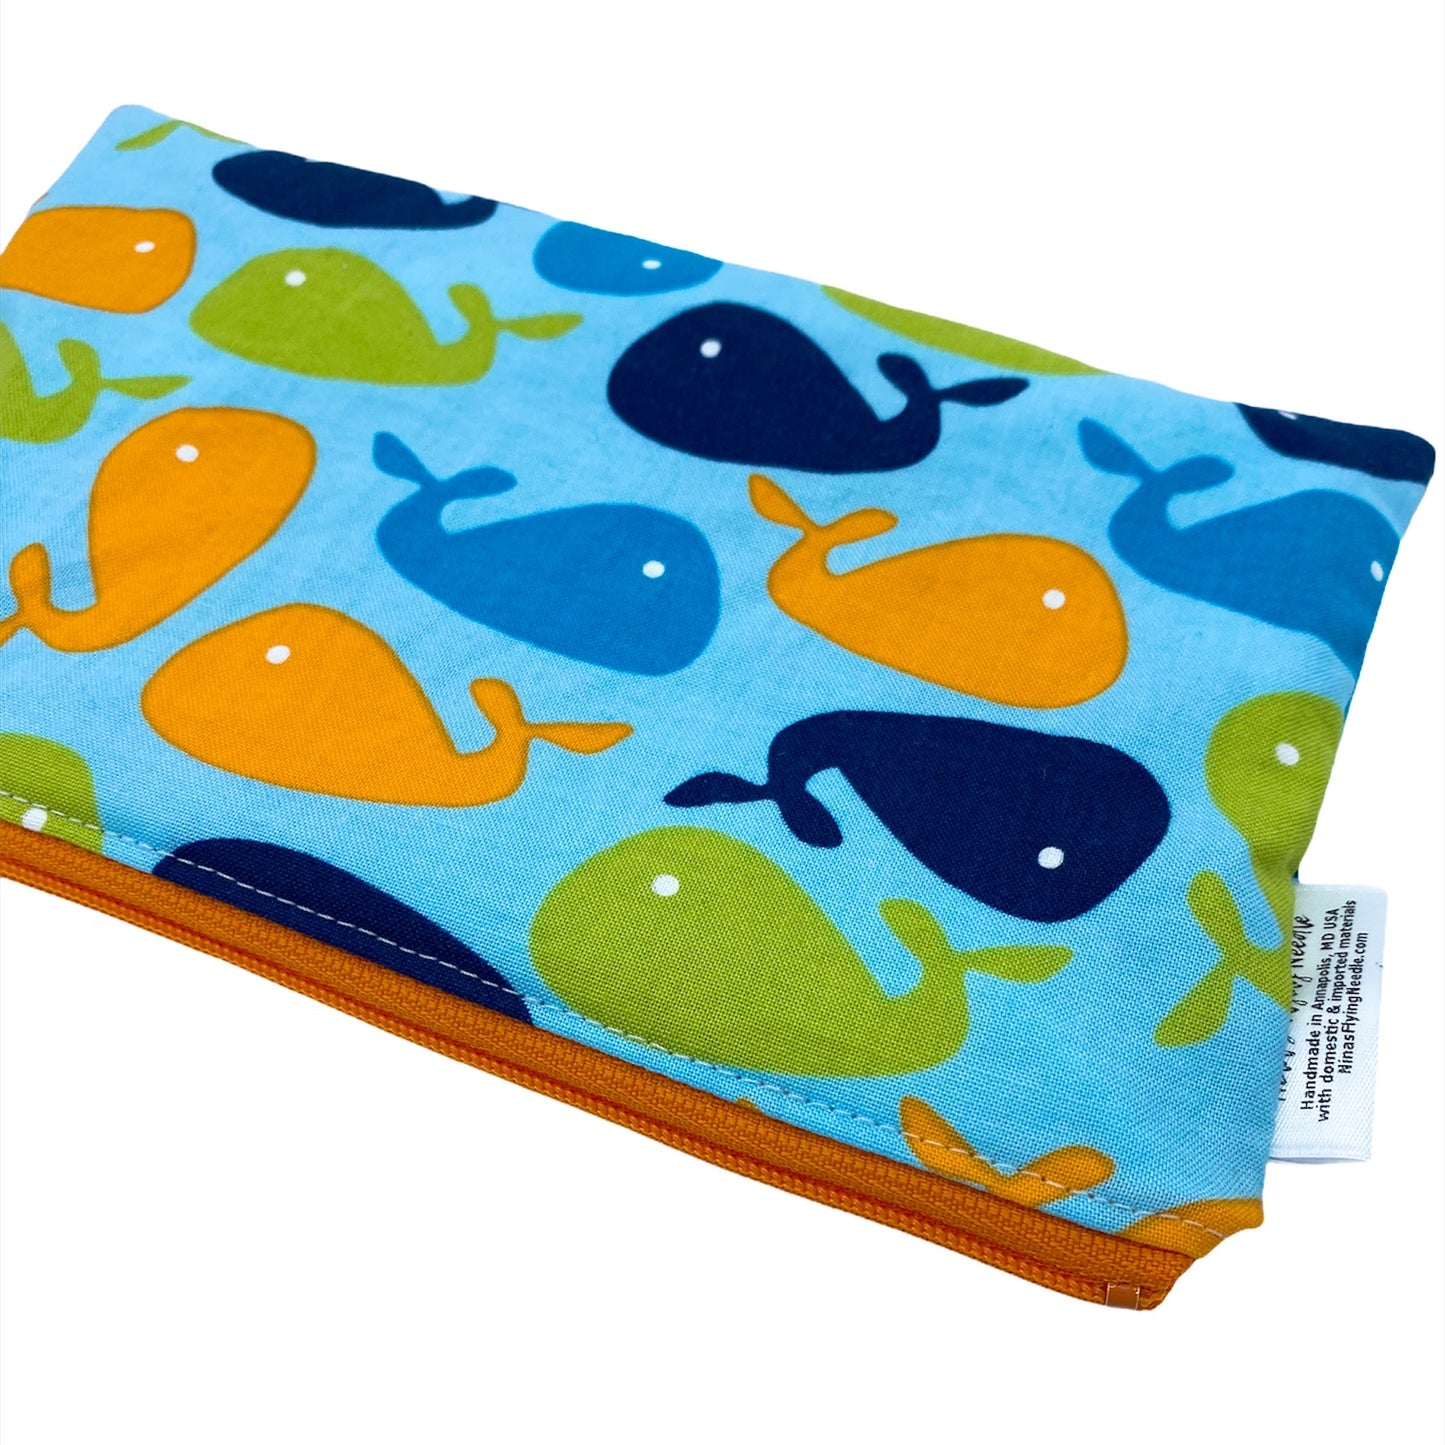 Snack Sized Reusable Zippered Bag Whales